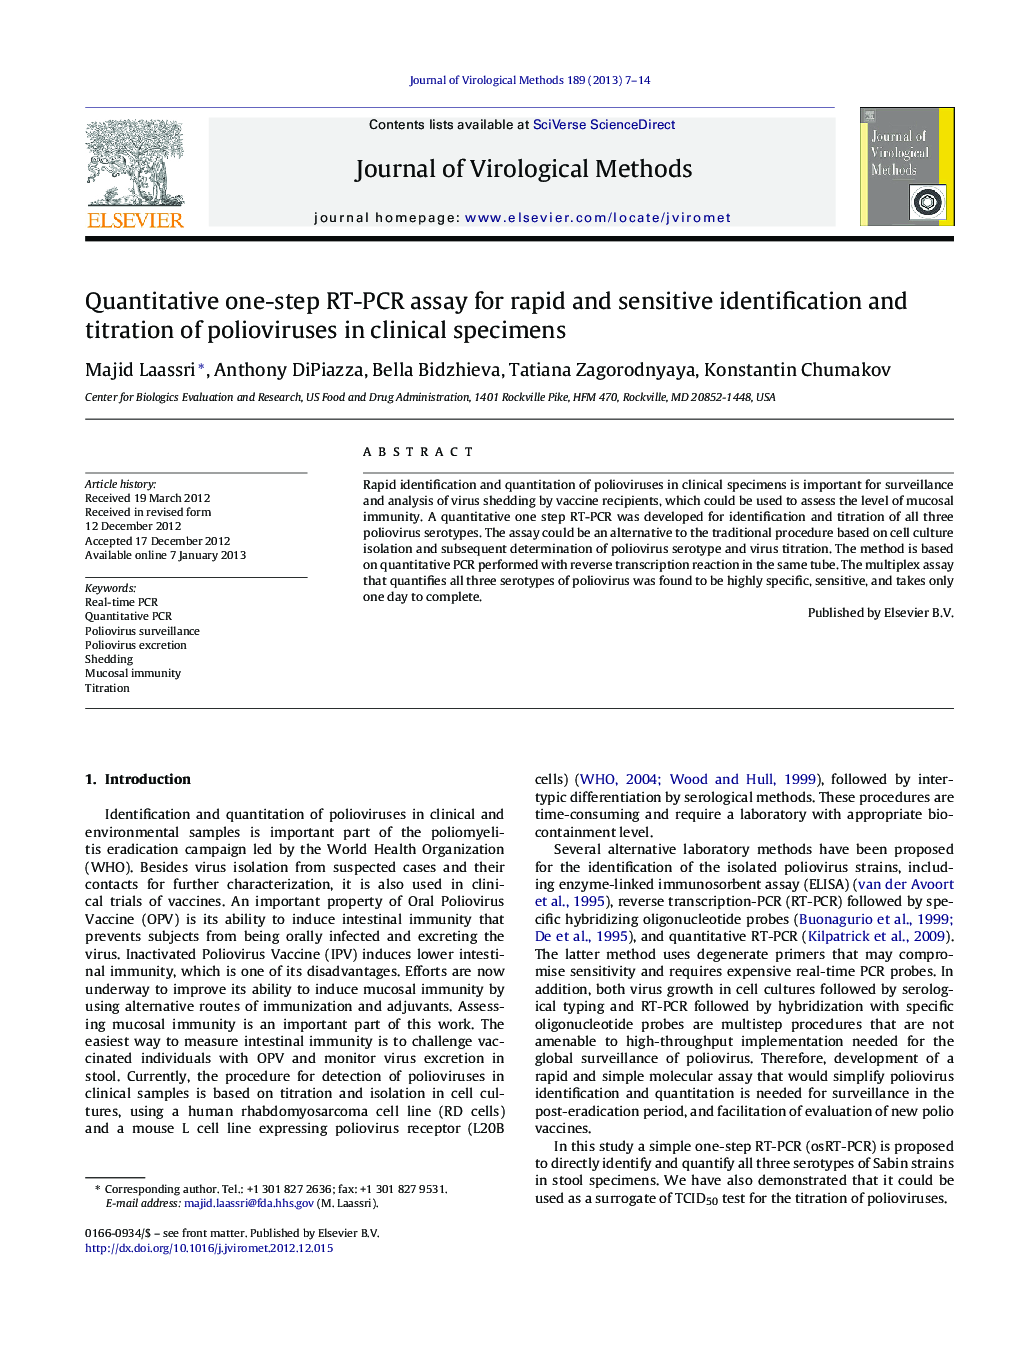 Quantitative one-step RT-PCR assay for rapid and sensitive identification and titration of polioviruses in clinical specimens